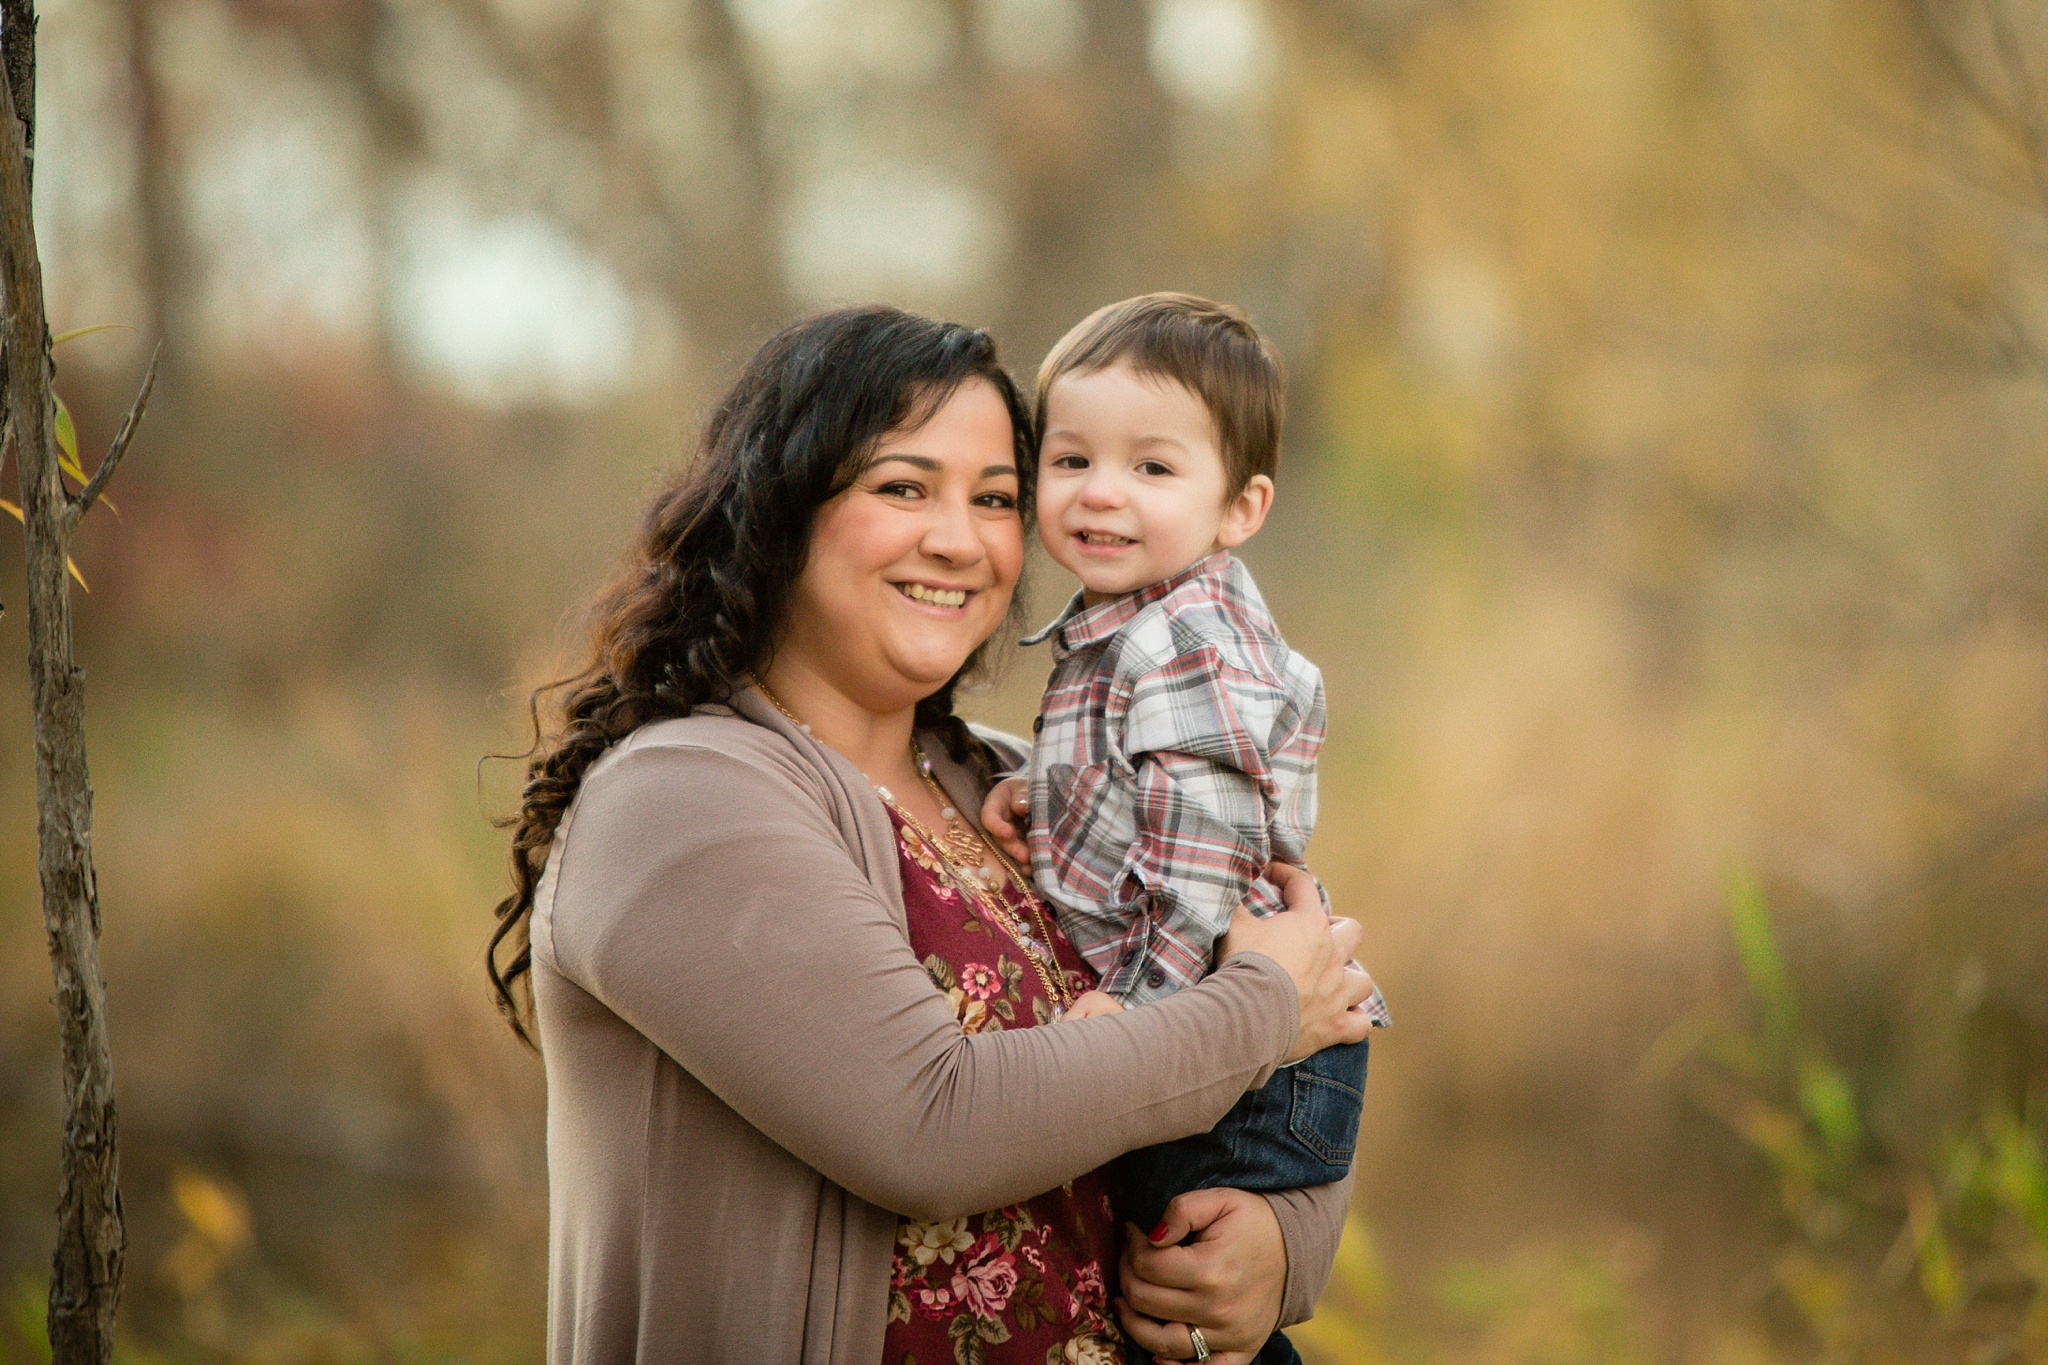 Mother & son hugging during fall family portraits. The Aguayo Family’s Fall Family Photo Session at Golden Ponds Nature Area by Colorado Family Photographer, Jennifer Garza. Golden Ponds Nature Area Family Photographer, Golden Ponds Nature Area, Golden Ponds, Golden Ponds Family Photographer, Longmont Family Photography, Longmont Family Photographer, Colorado Family Photos, Colorado Family Photographer, Colorado Fall Photos, Fall Photos